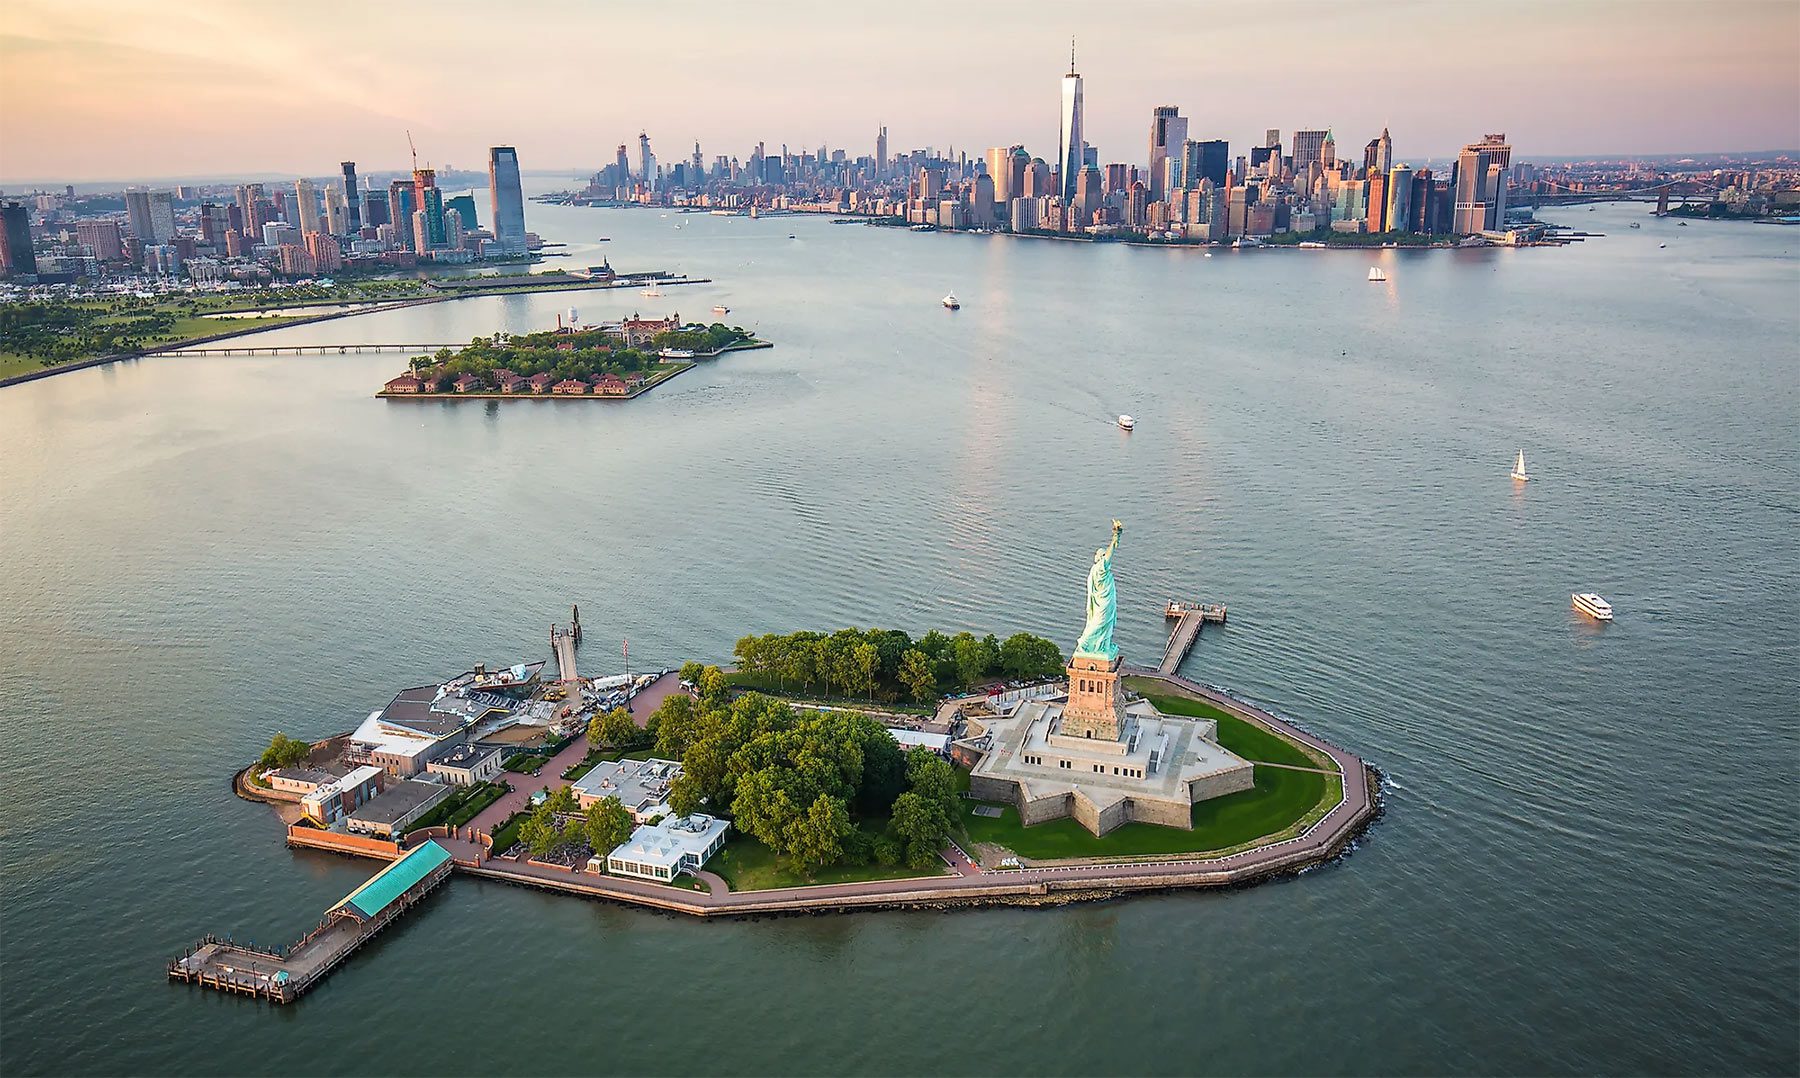 Liberty Island and Statue of Liberty in New York City